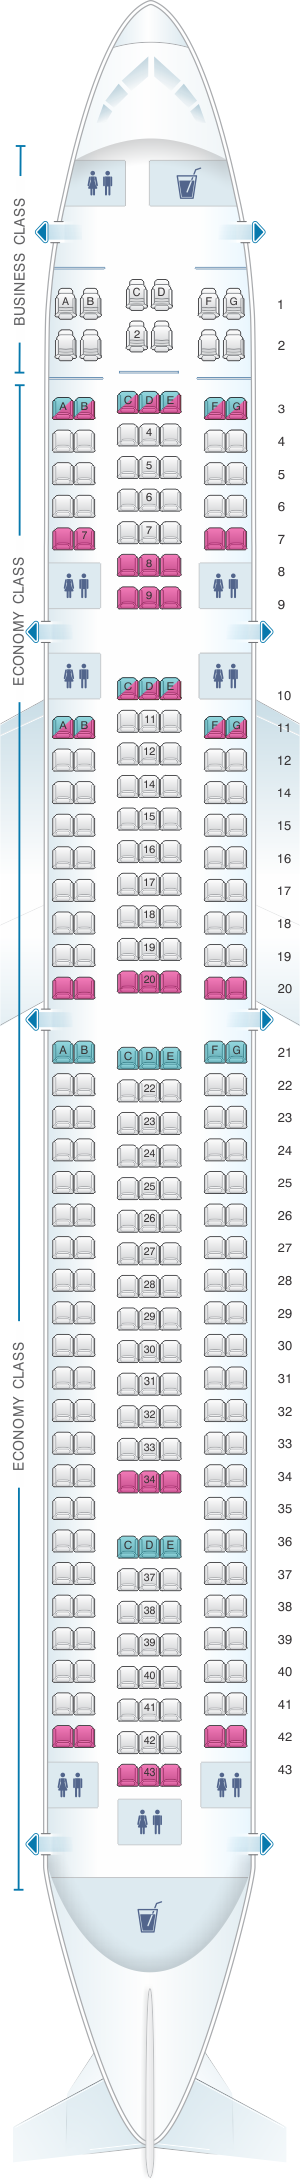 Seat map for Blue Panorama Boeing B767 300ER